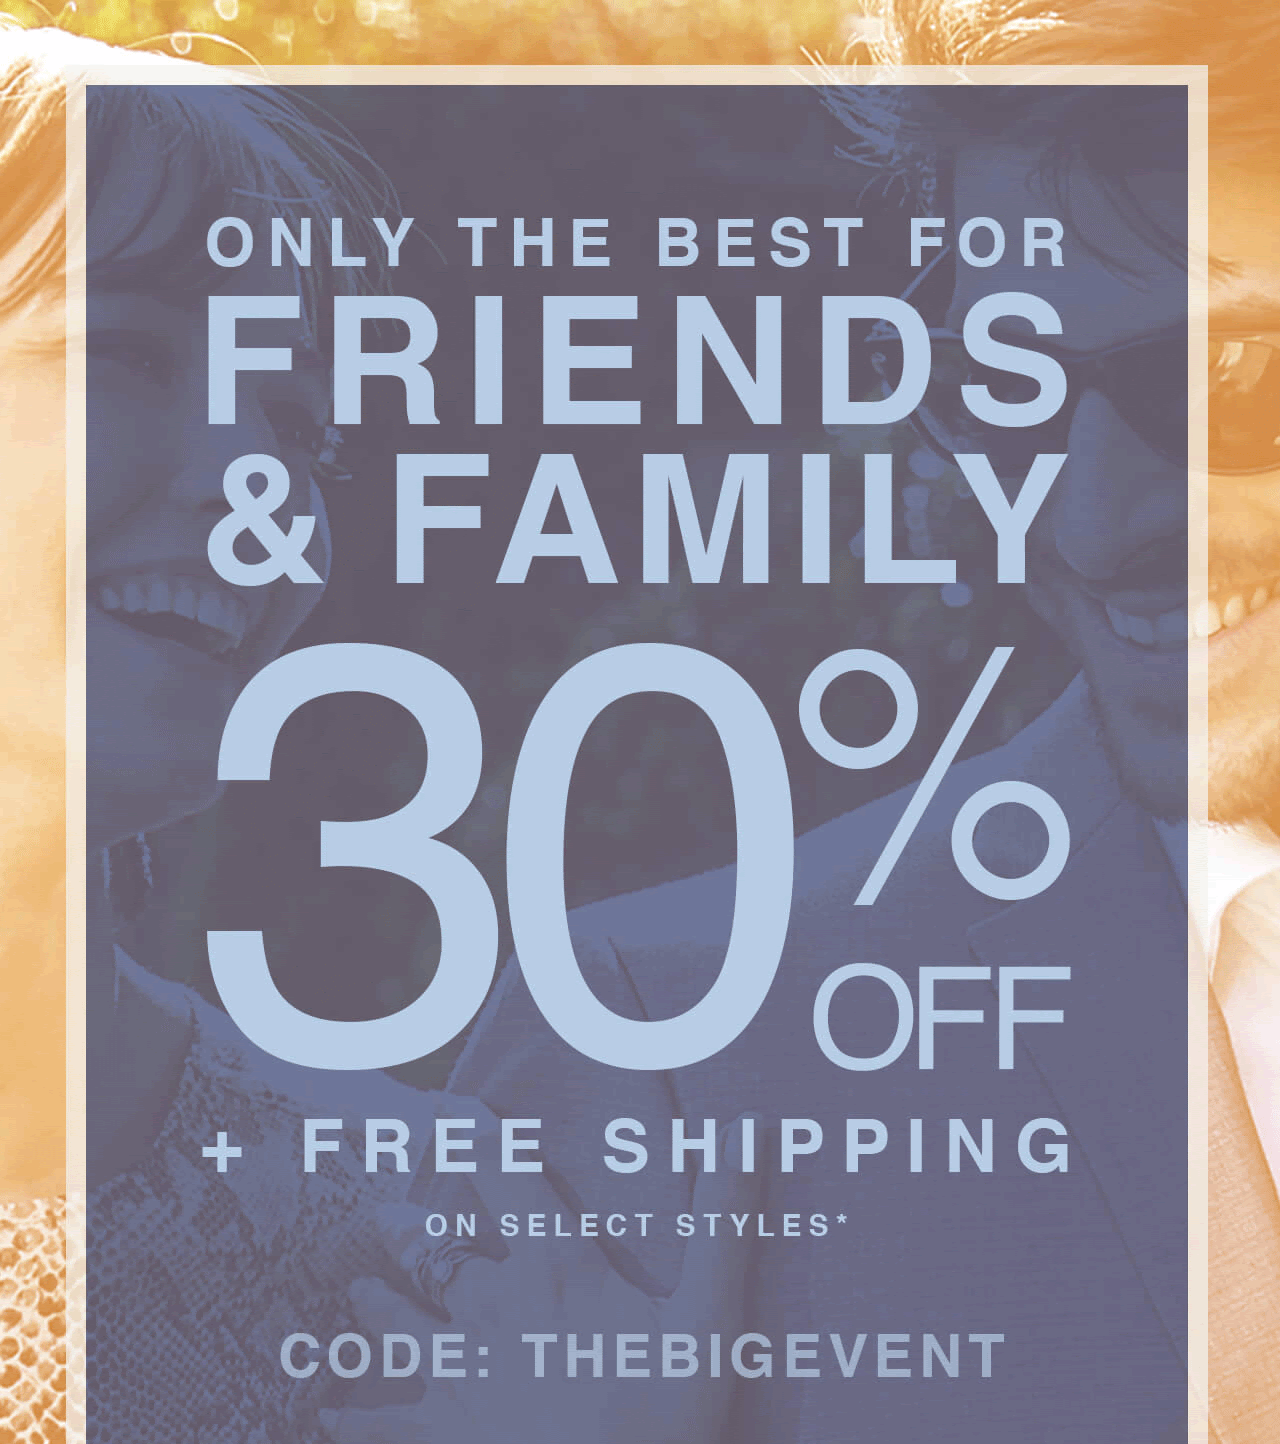 Friends and Family. 30% OFF + FREE SHIPPING. CODE: THEBIGEVENT